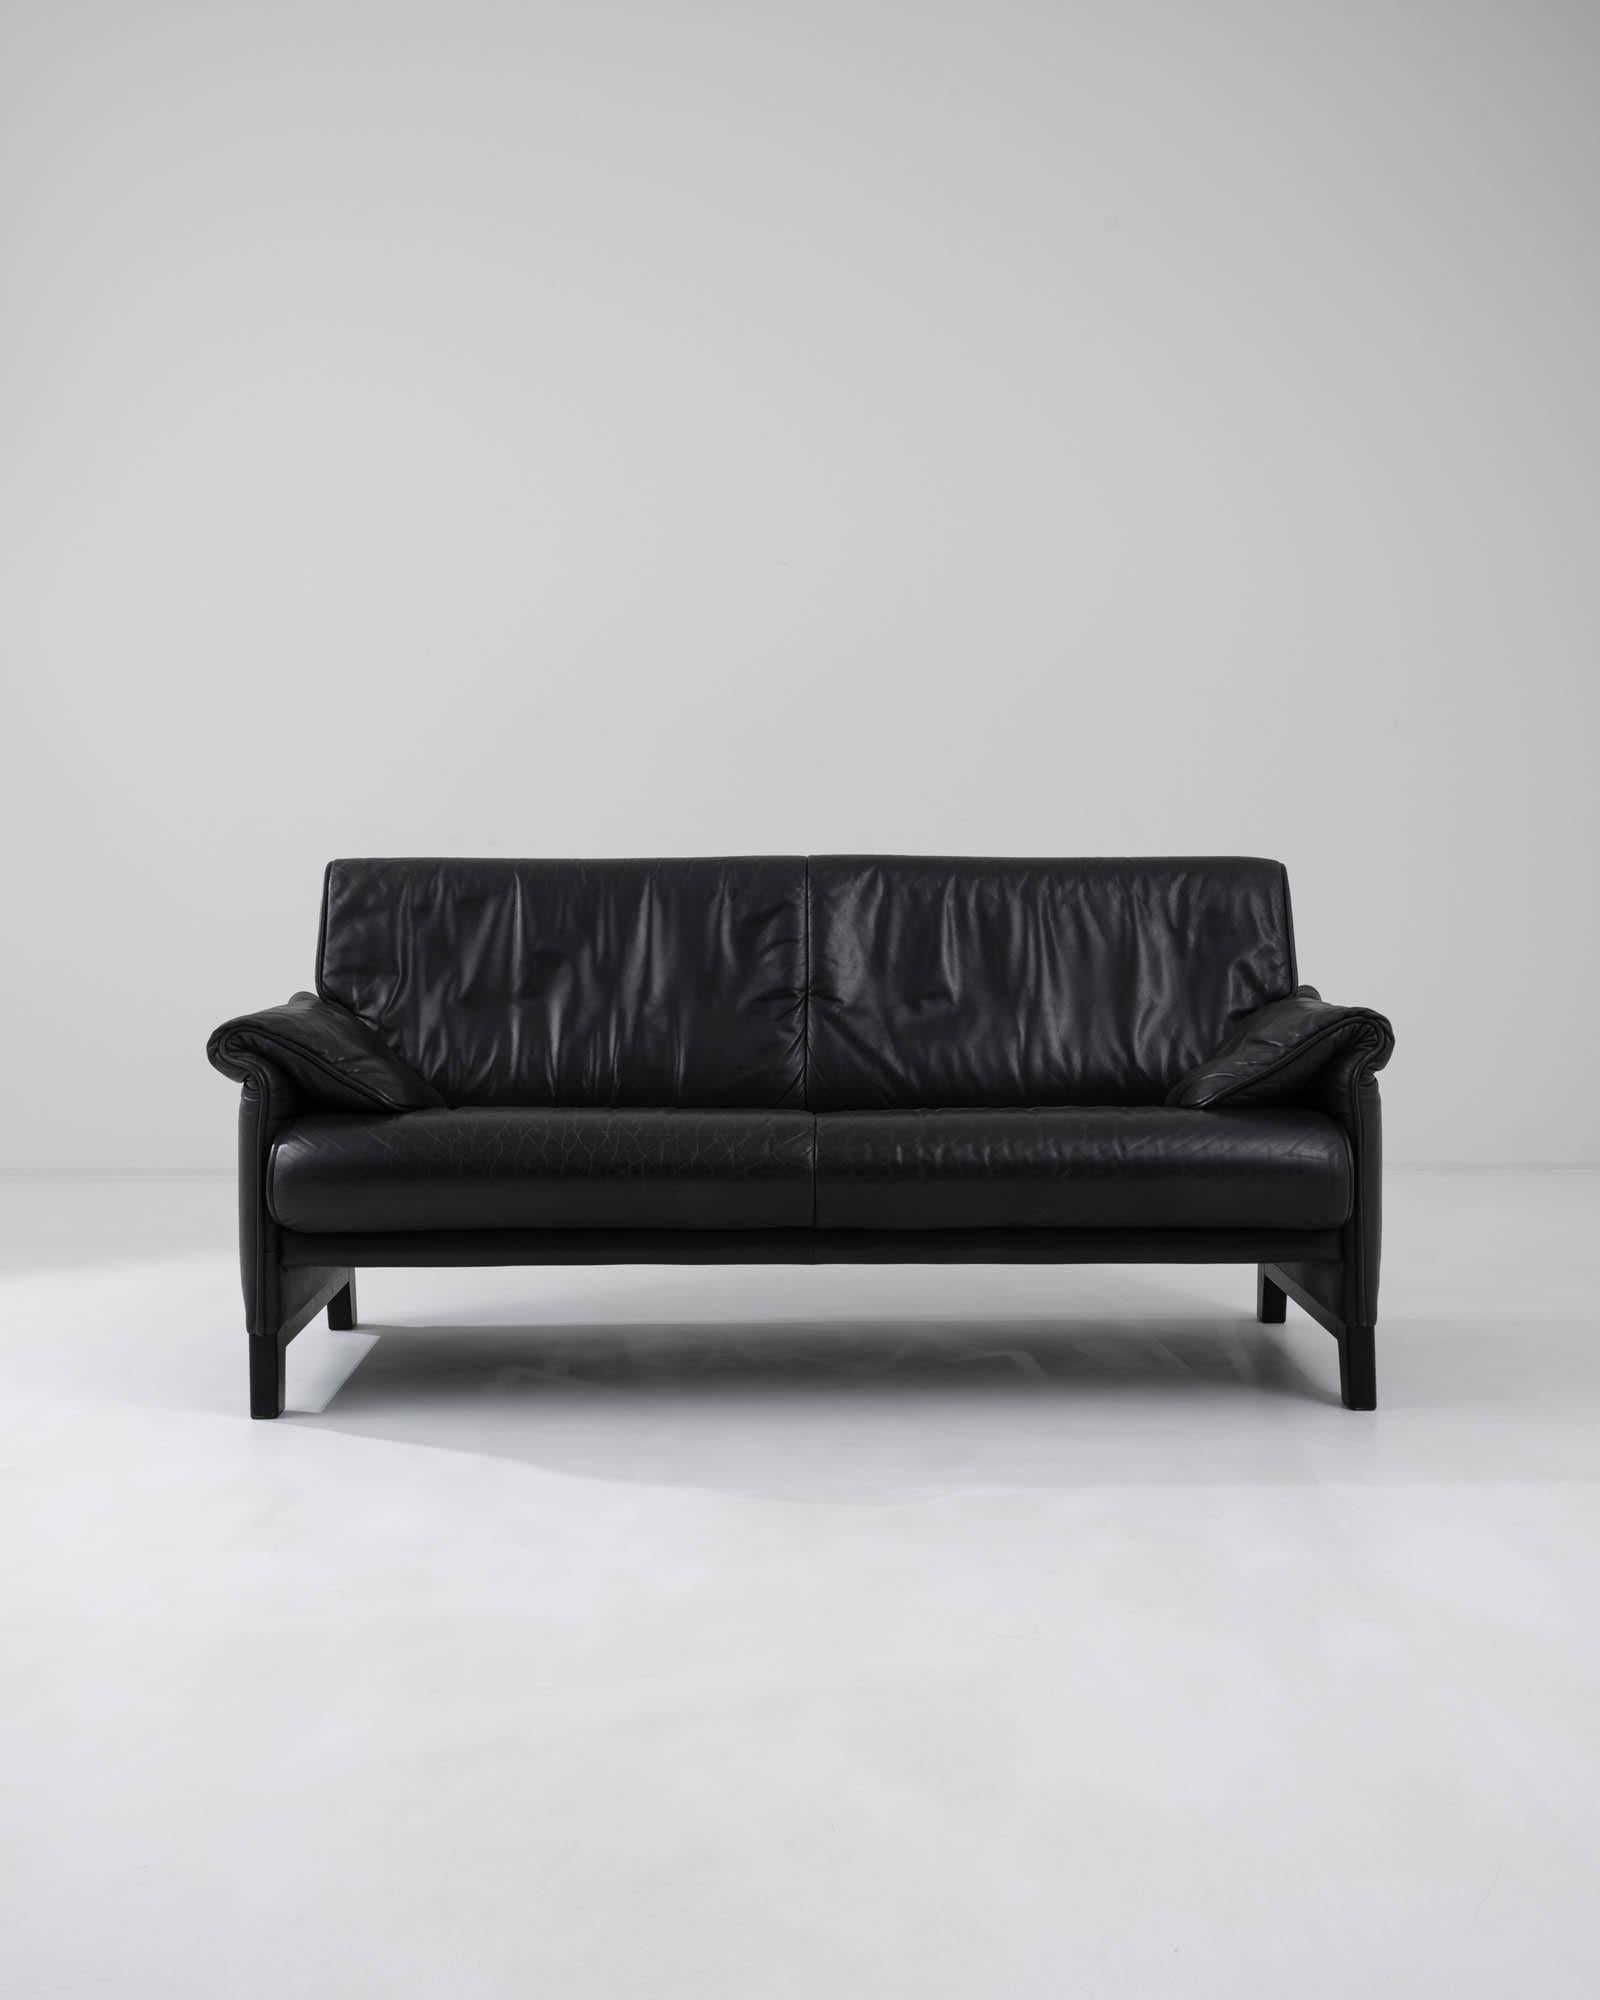 Hand-made in Switzerland by renowned furniture manufacturers De Sede, this Modernist leather sofa is simultaneously sophisticated and playful. The armrests double over themselves in soft, slouchy folds, giving a relaxed inflection to the otherwise